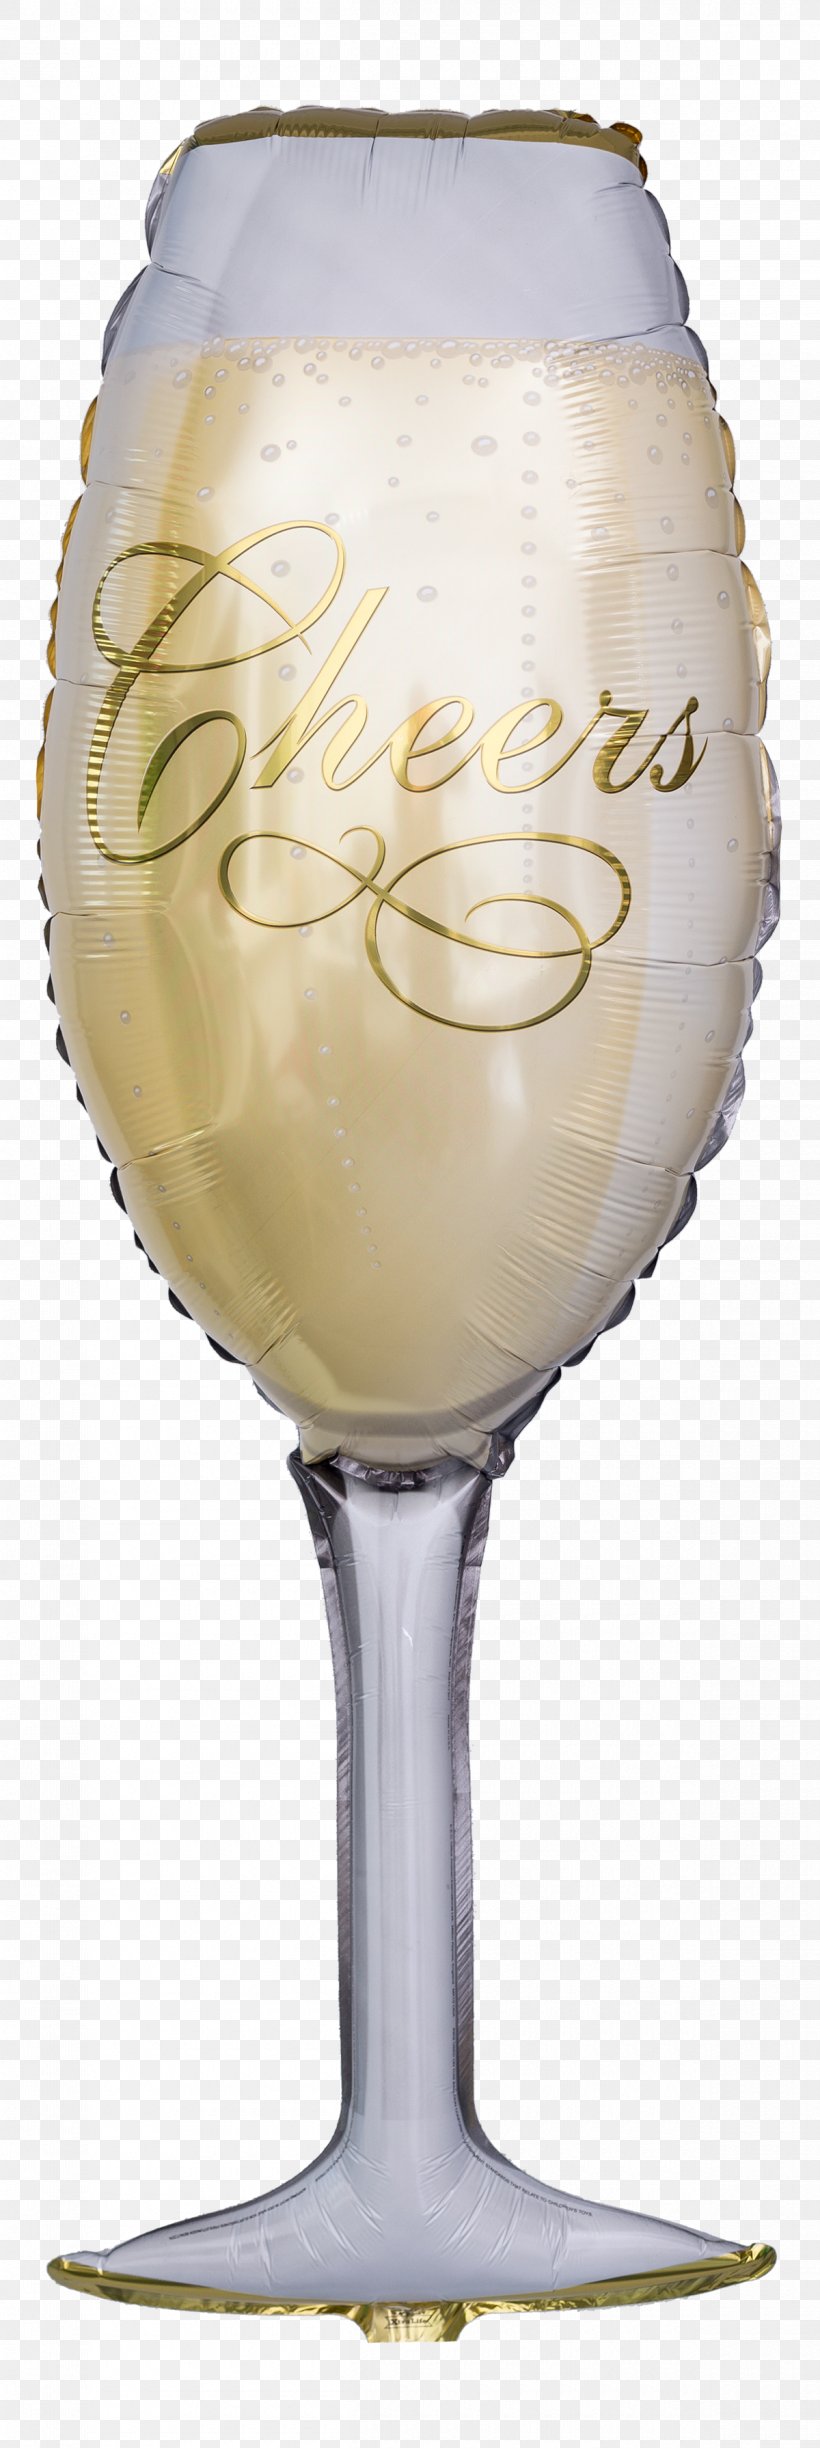 Wine Glass Toy Balloon Champagne Glass Balloon Mail, PNG, 1200x3583px, Wine Glass, Balloon, Balloon Mail, Beer Glass, Birthday Download Free